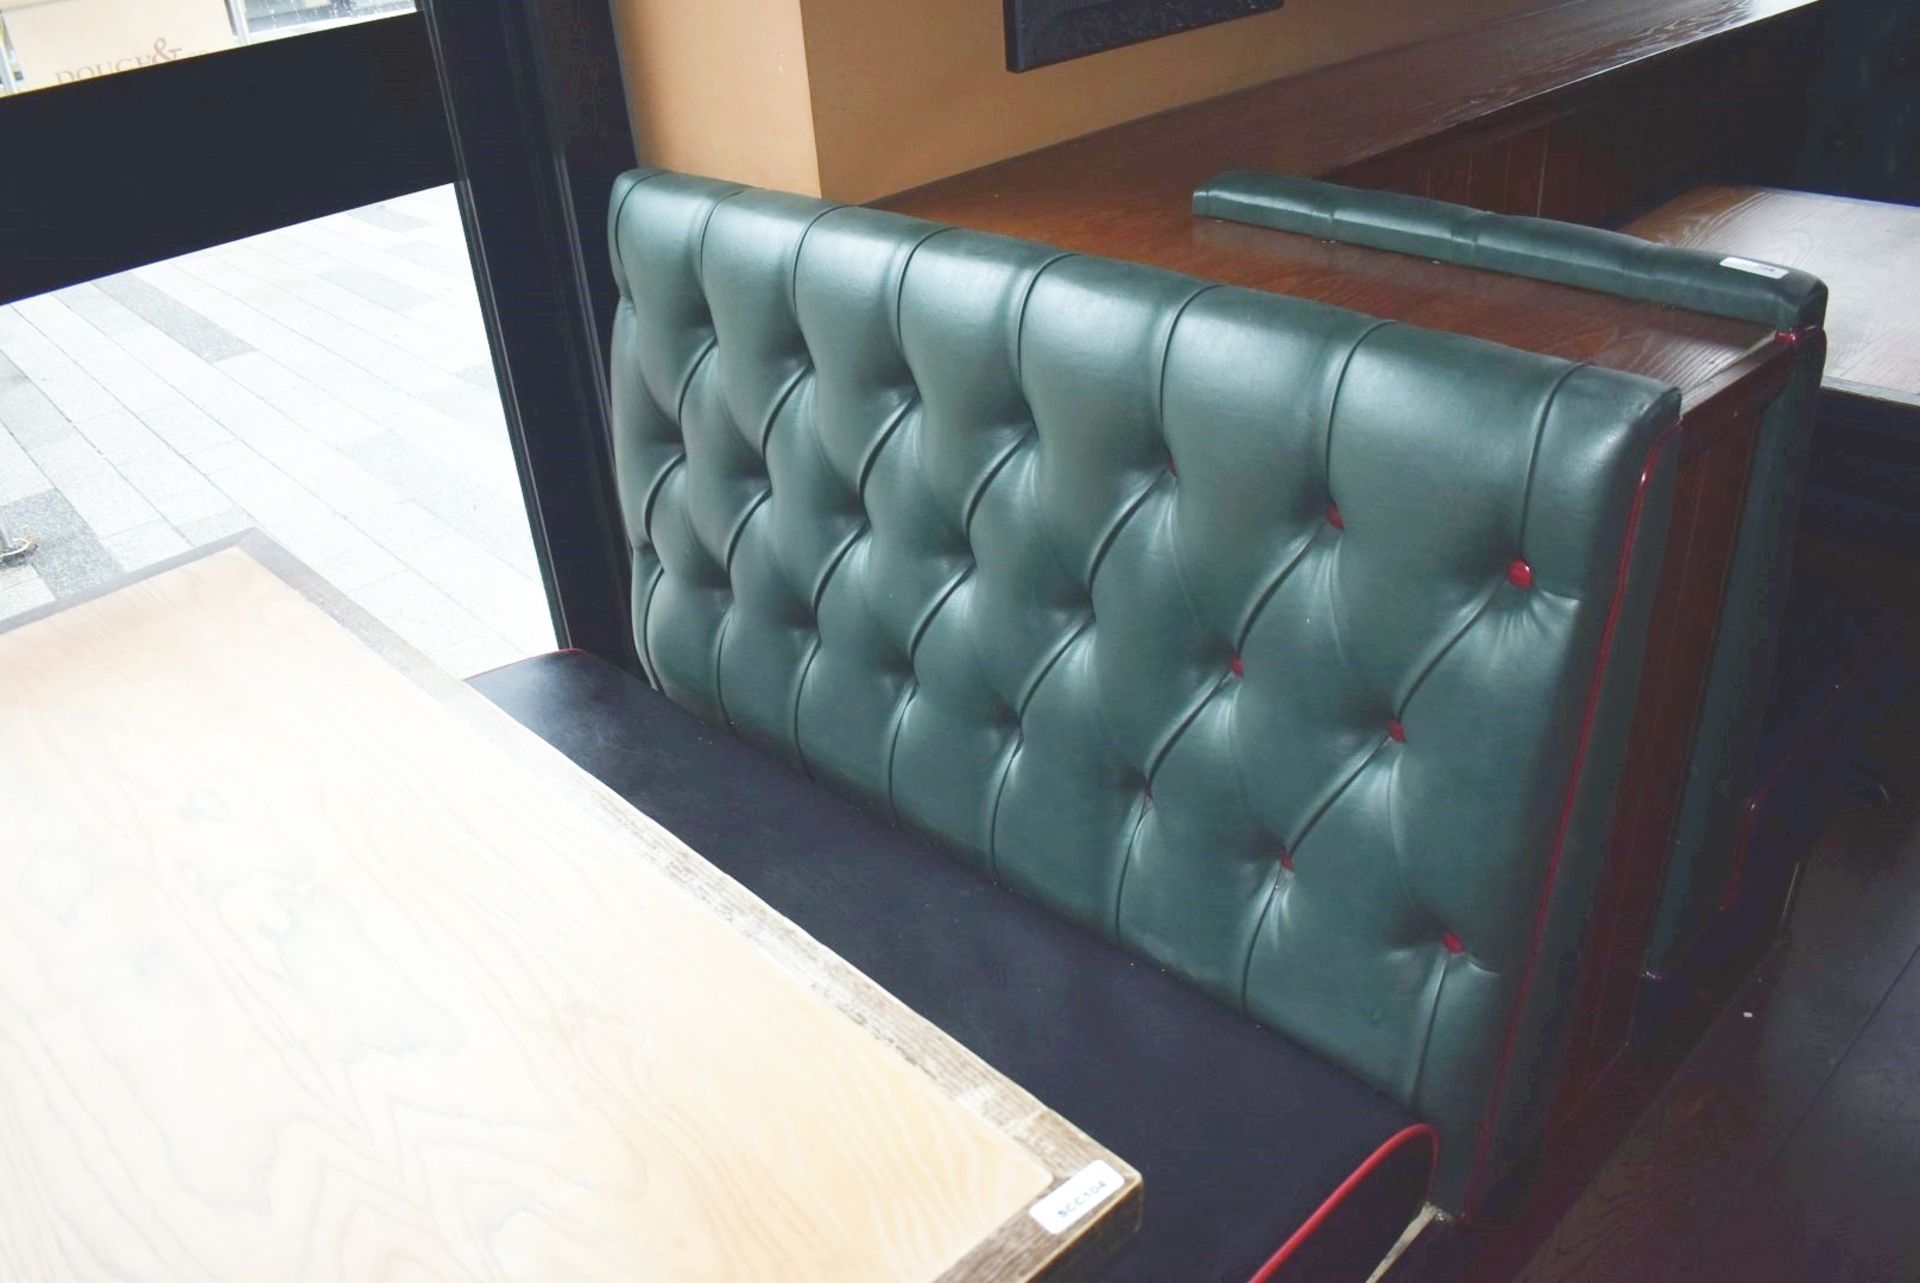 4 x Sections of Restaurant Double Booth Seating - Sits Up to 12 Persons - Green & Black Upholstery - Image 13 of 24